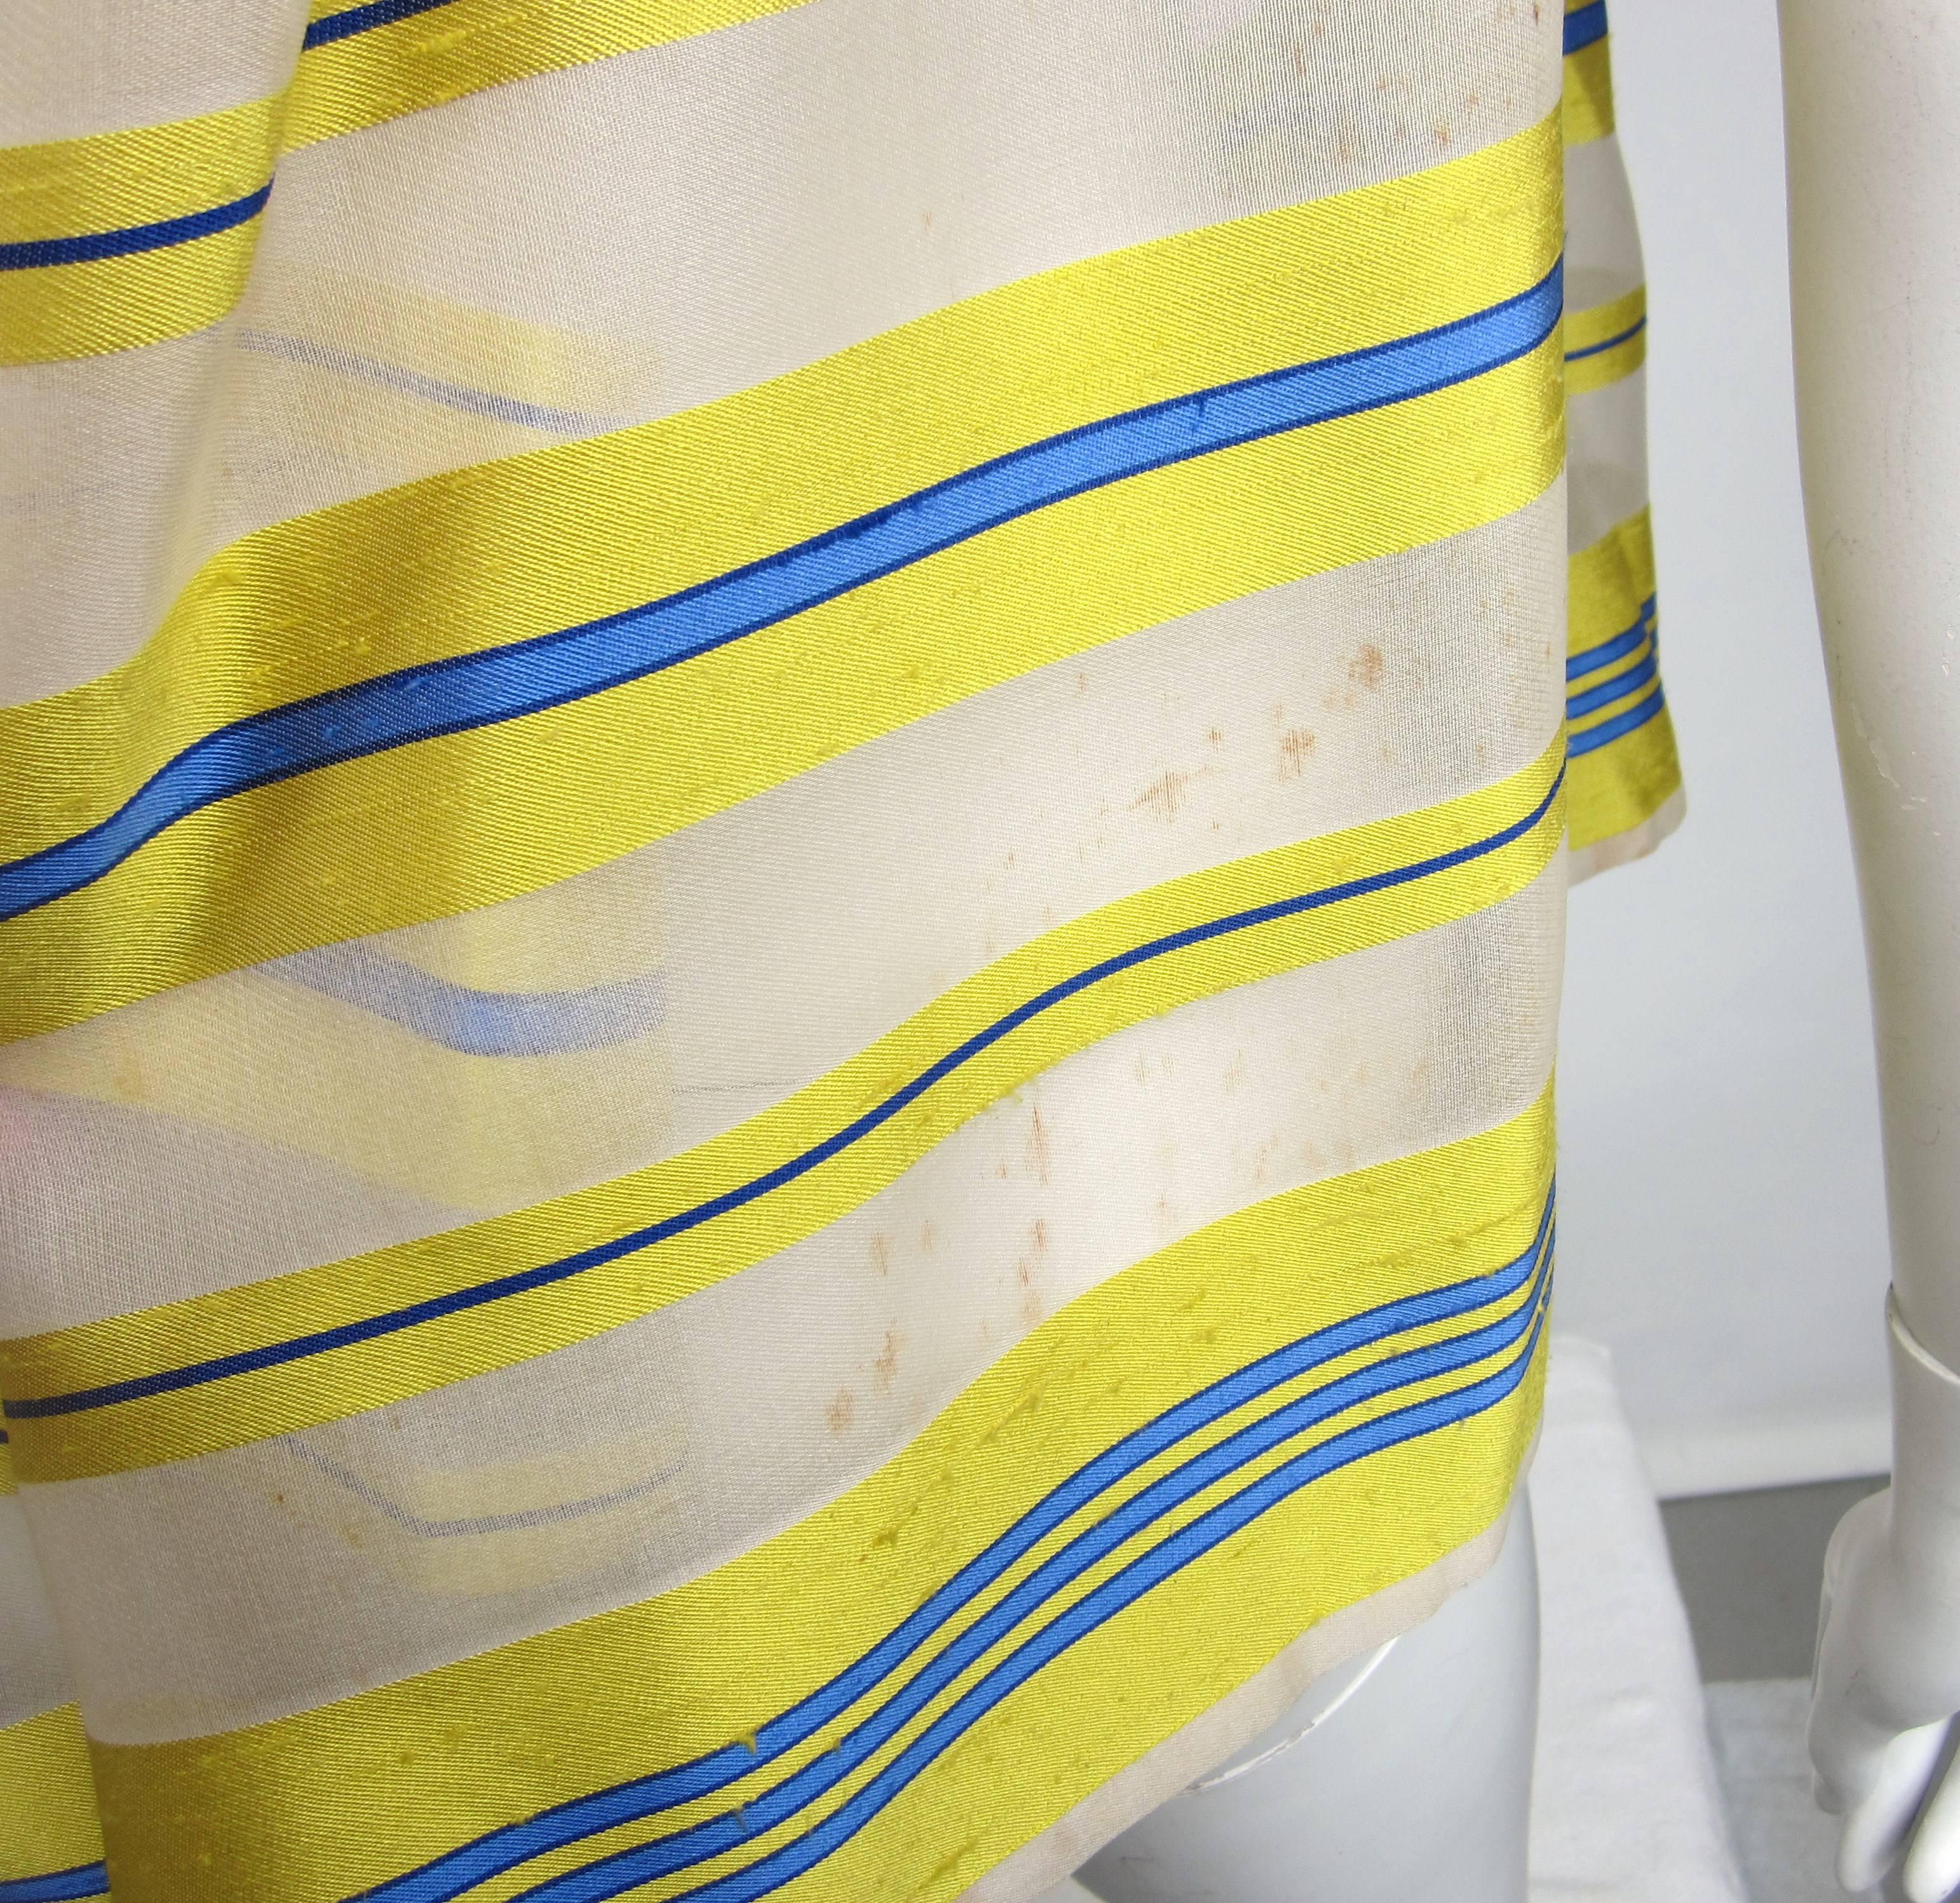 Yves Saint Laurent Silk Dupioni Over Sized Yellow Striped Blouse 1990s 3